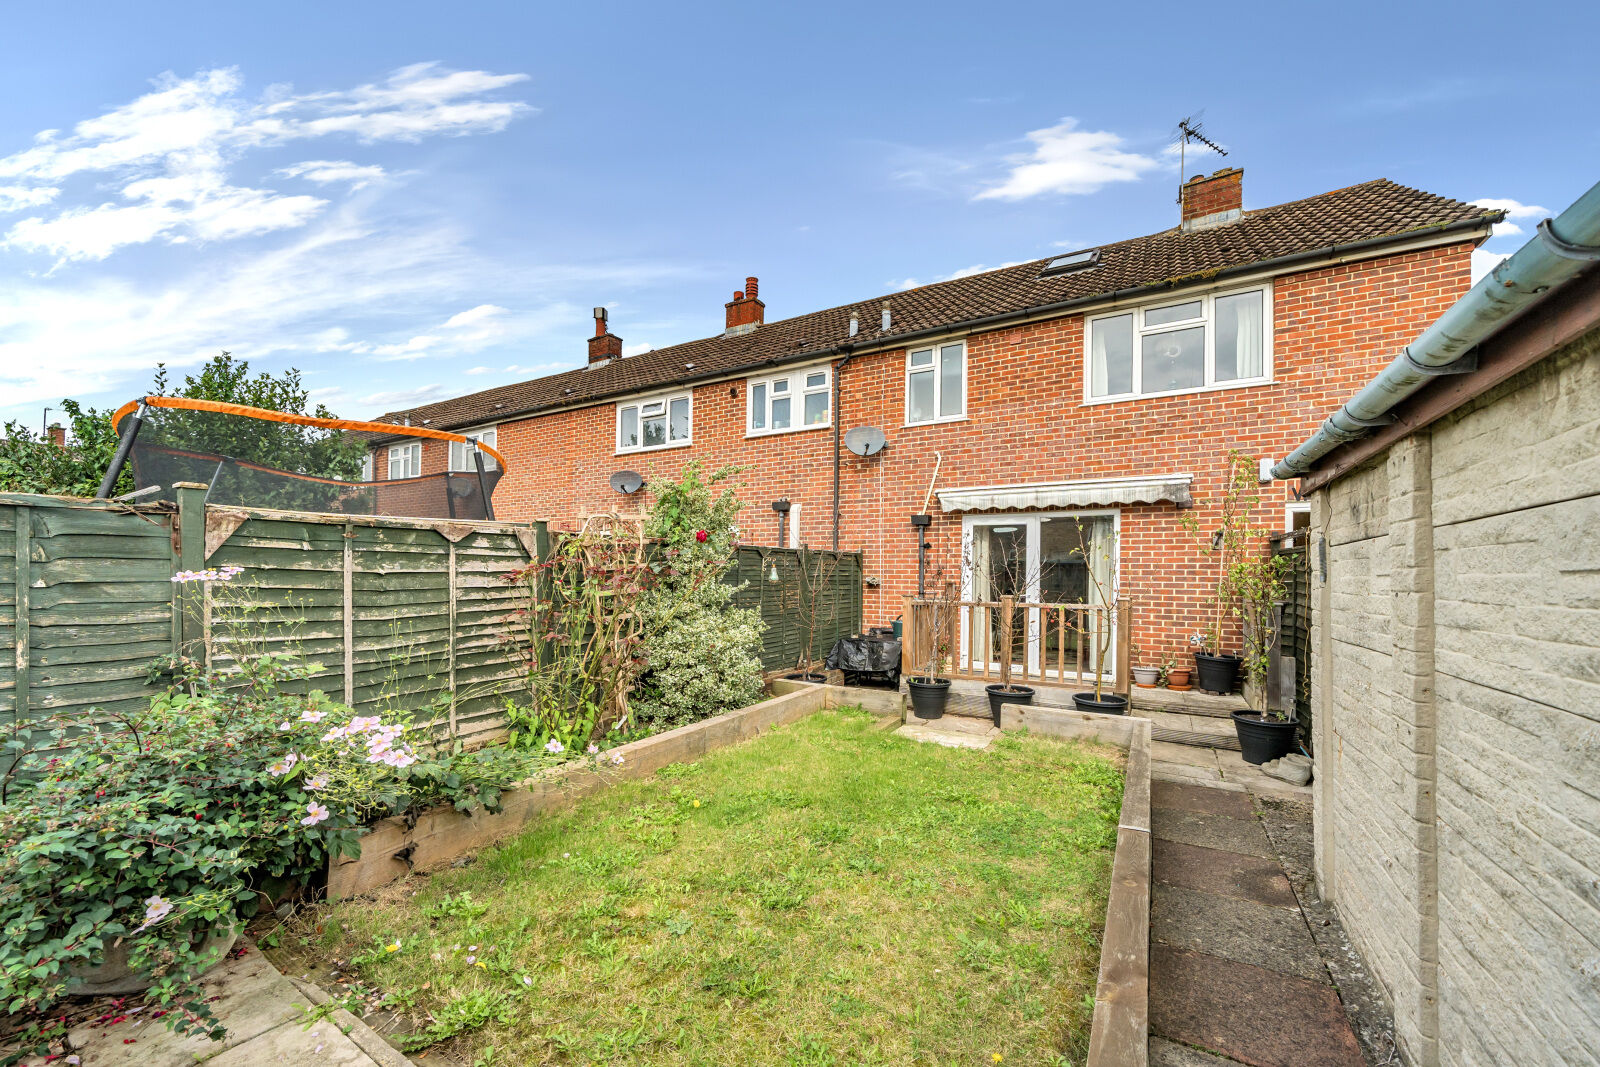 3 bedroom end terraced house for sale Buscot Drive, Abingdon, OX14, main image